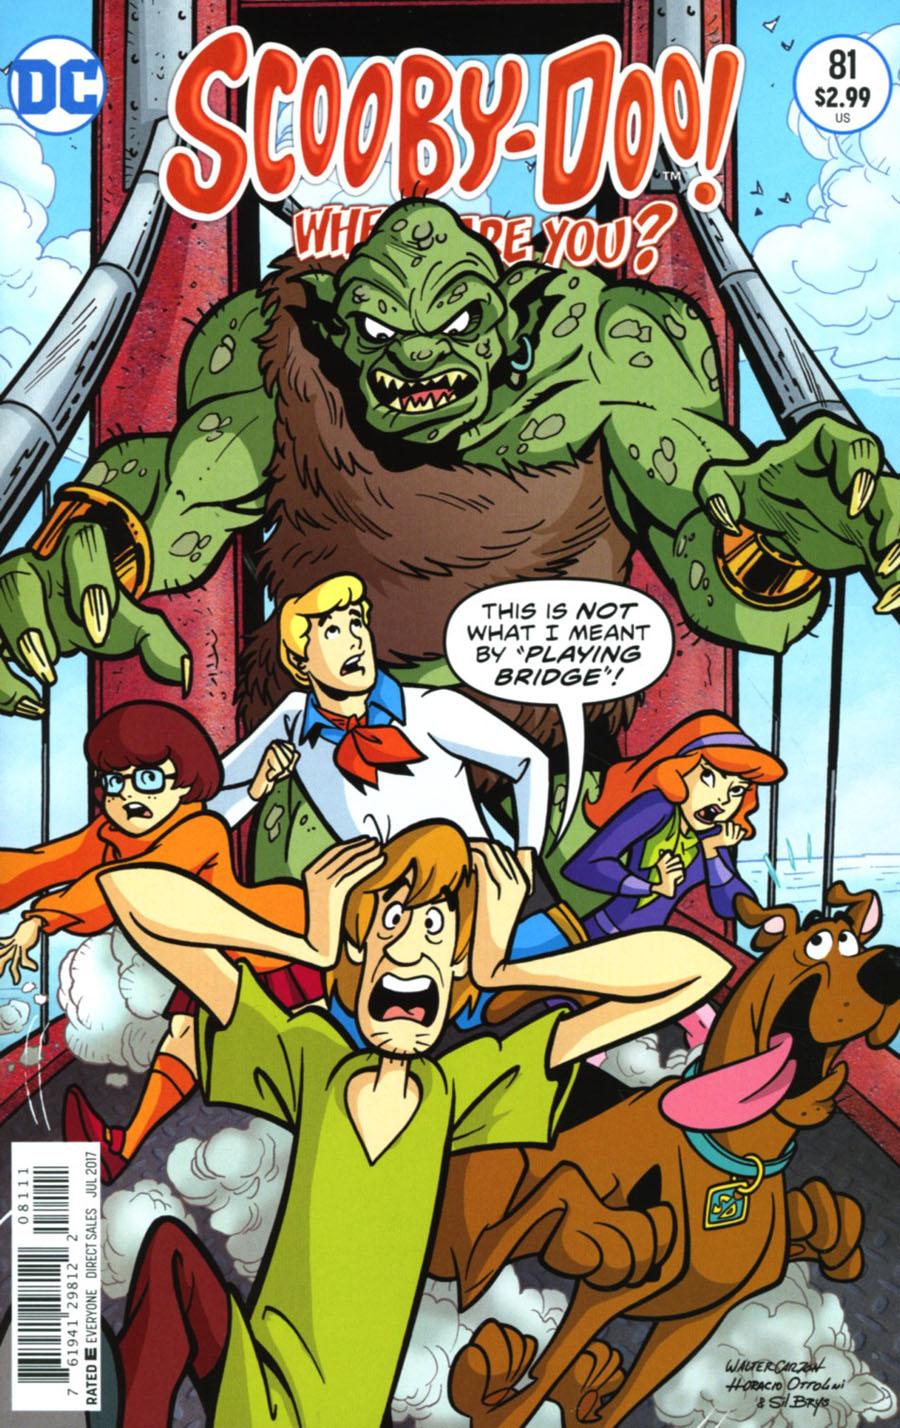 Scooby-Doo Where Are You Vol. 1 #81